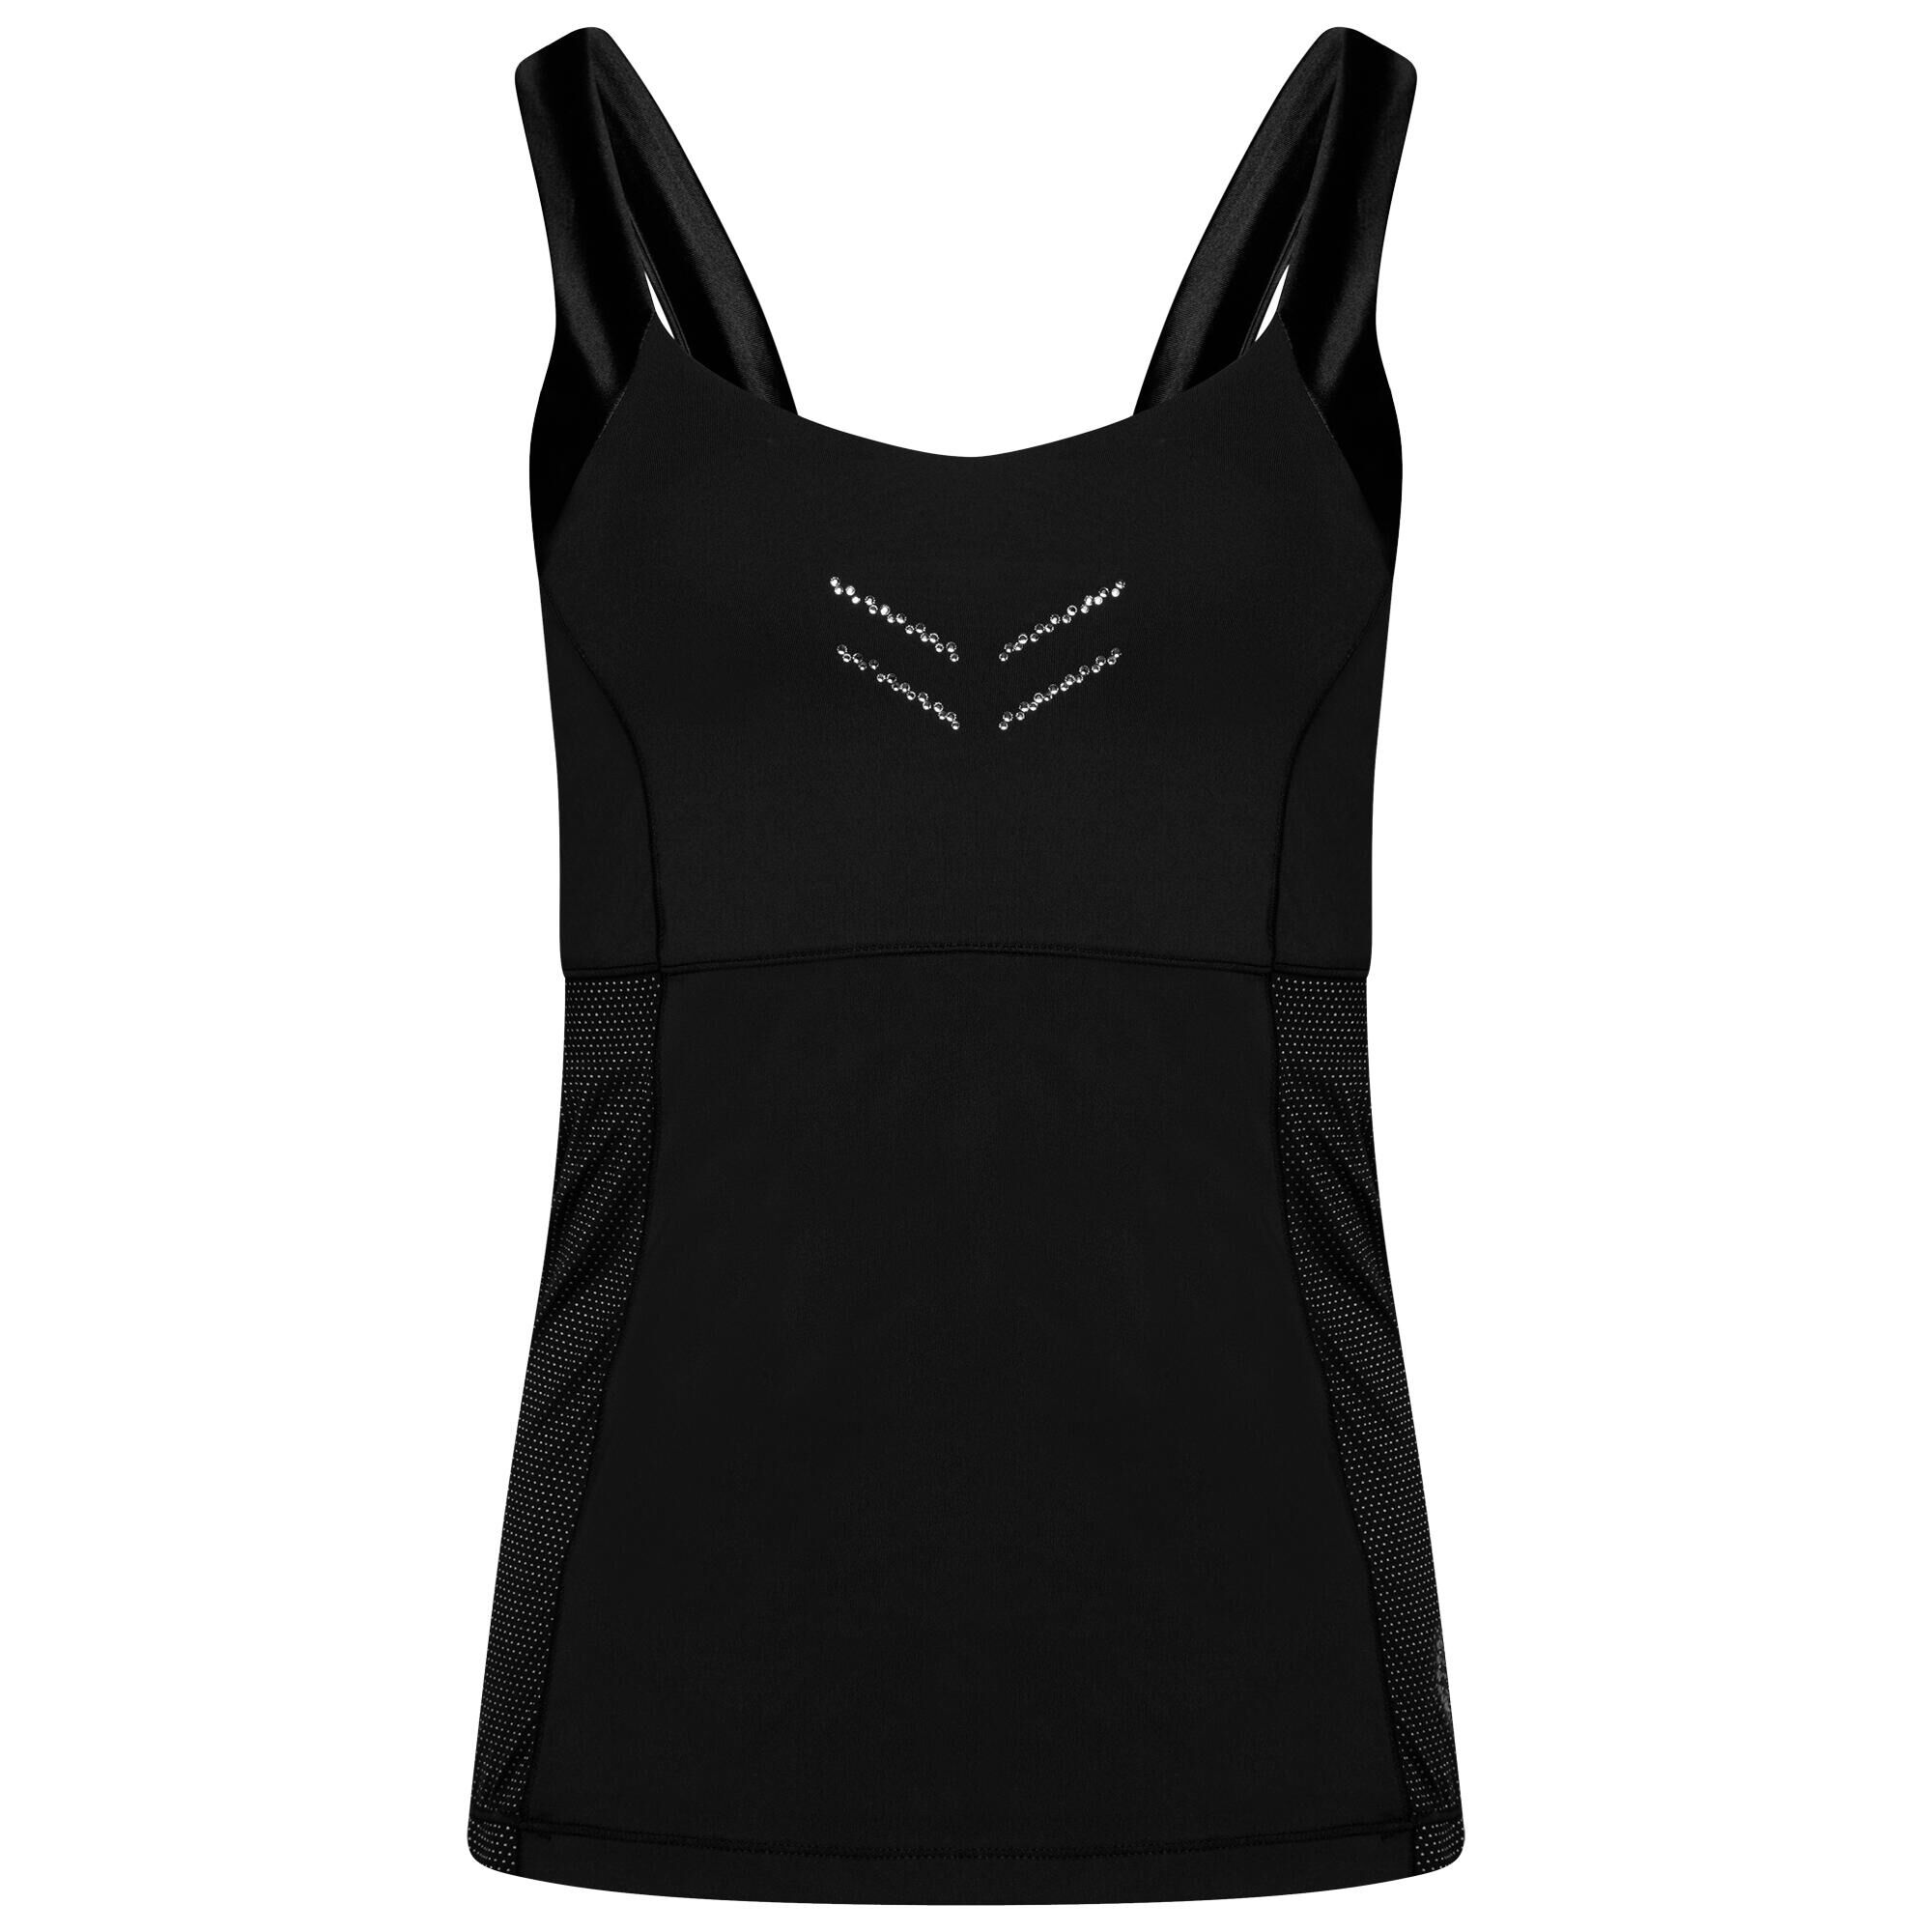 DARE 2B Crystallize Women's Fitness Fitted Tank - Black